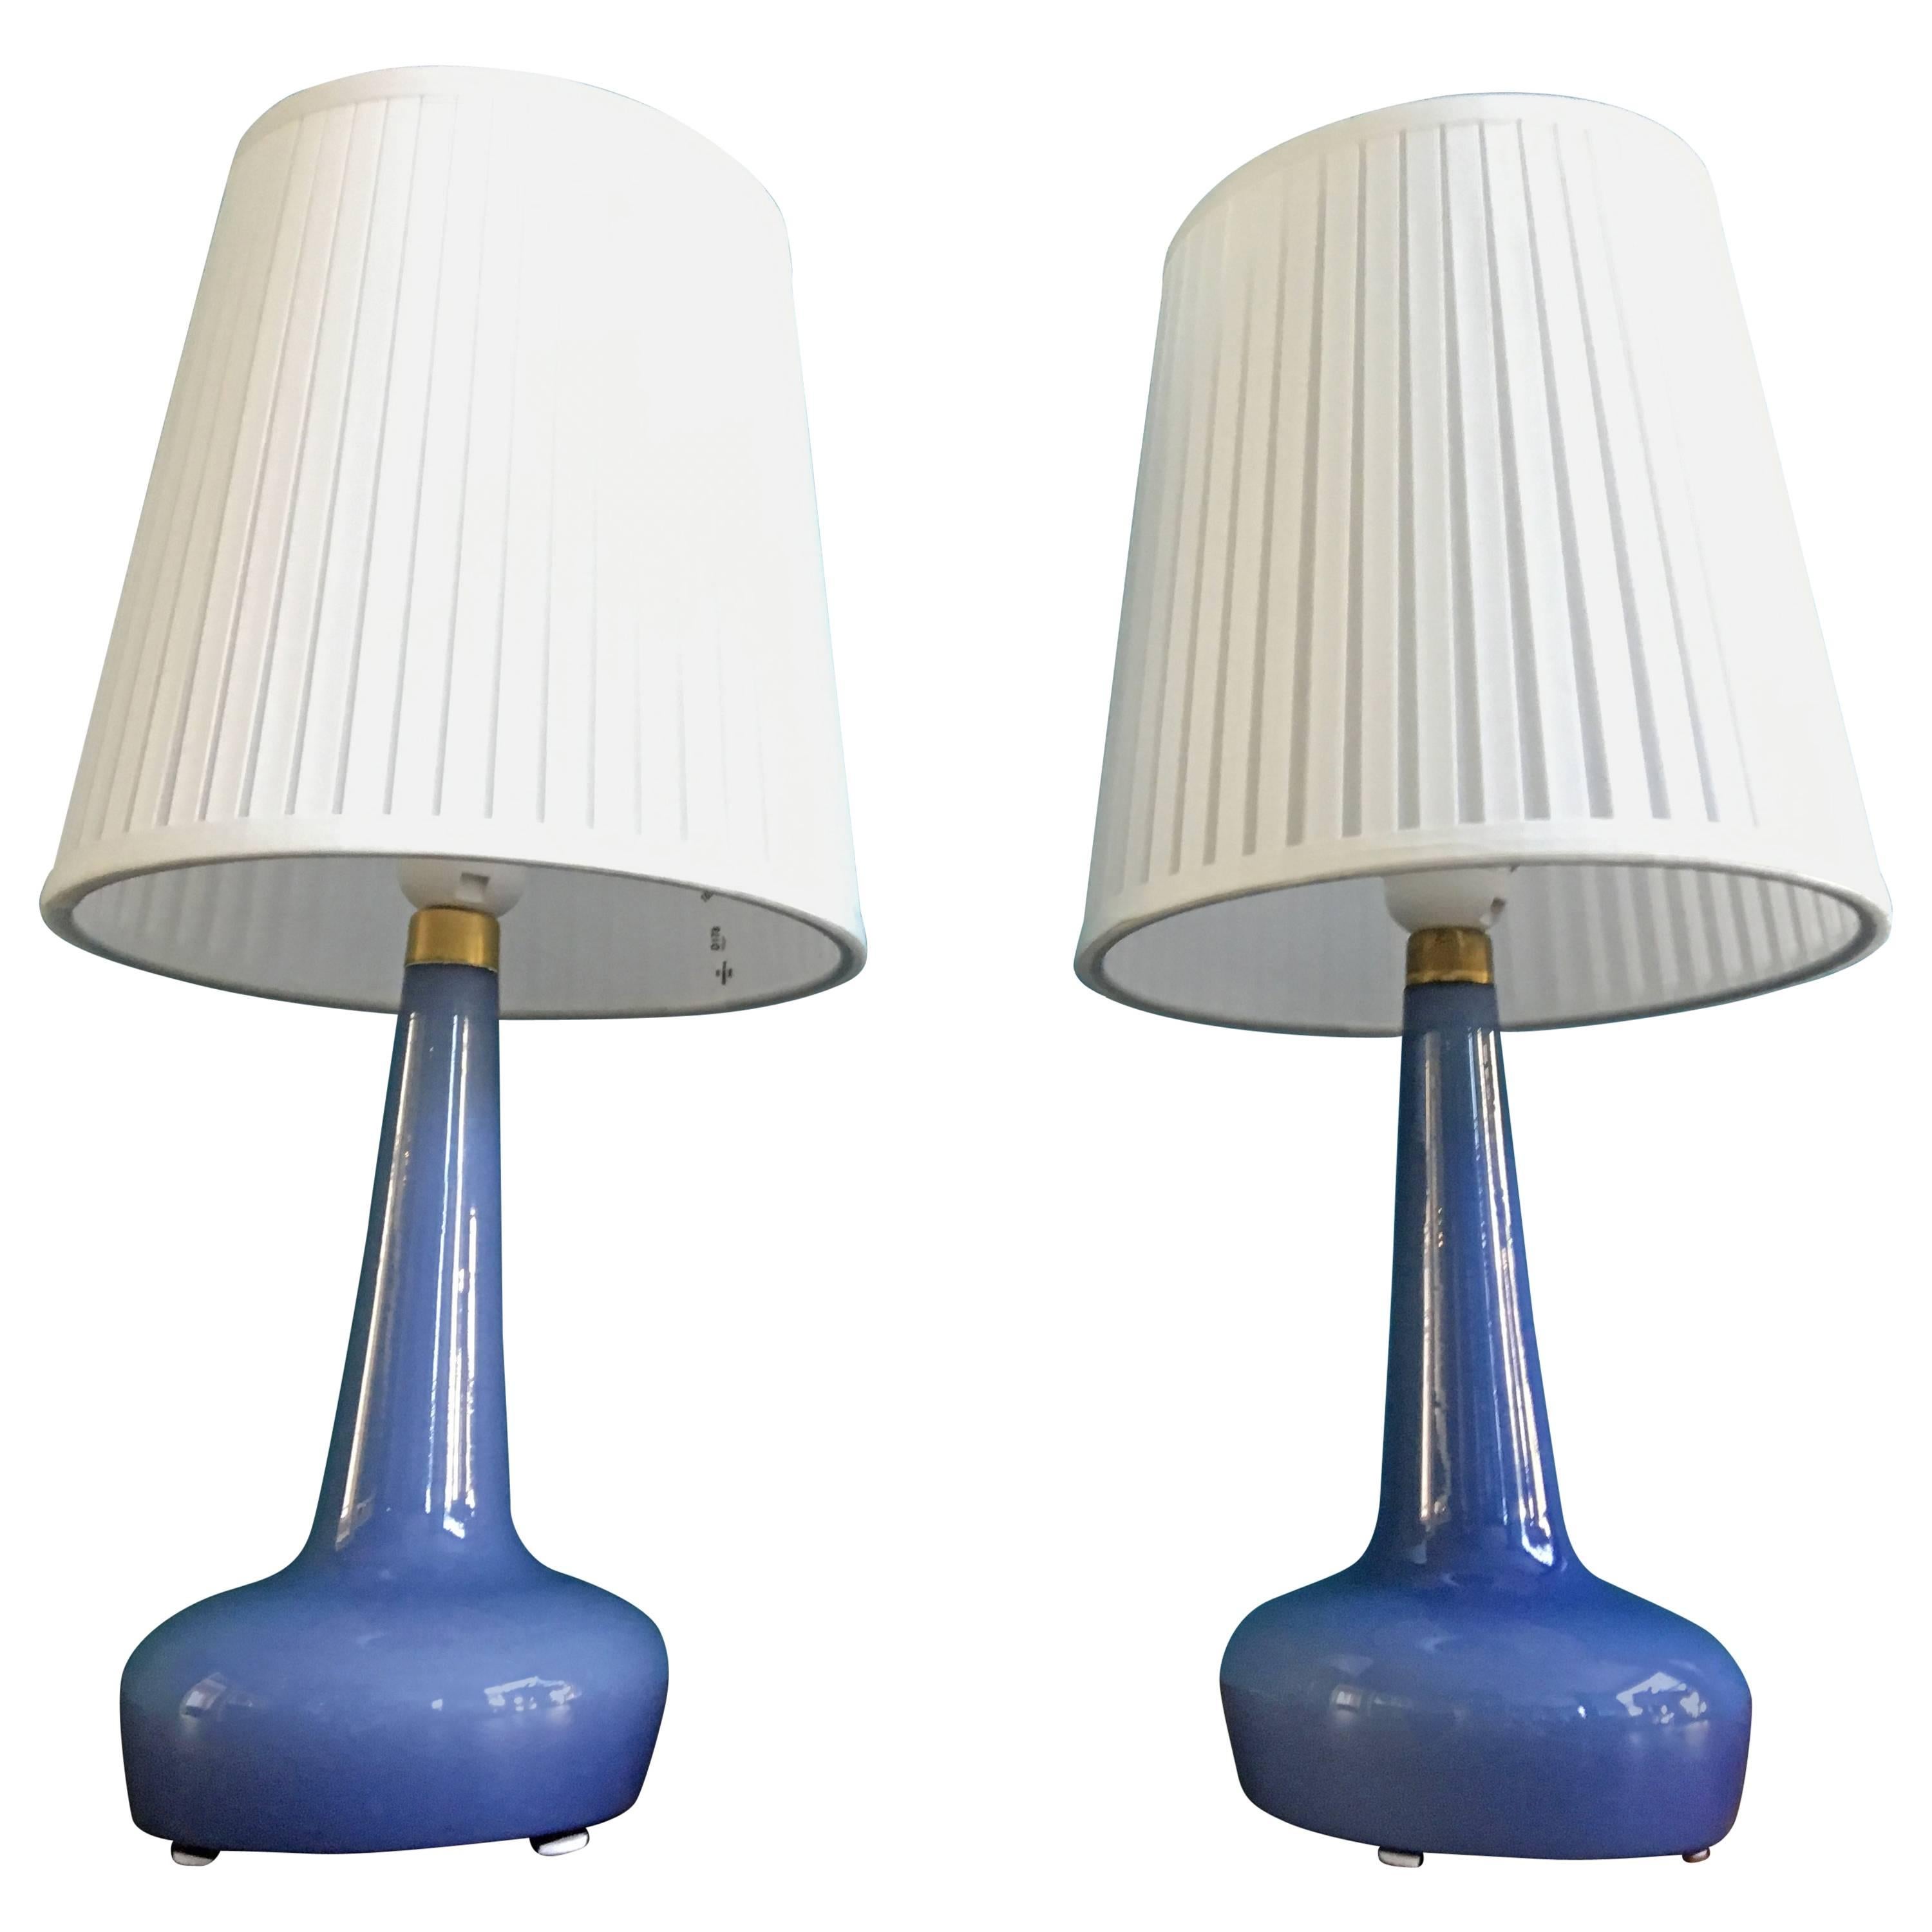 Pair of Rare Danish Table Lamps Model 311 by Esben Klint for Holmegaard, 1958